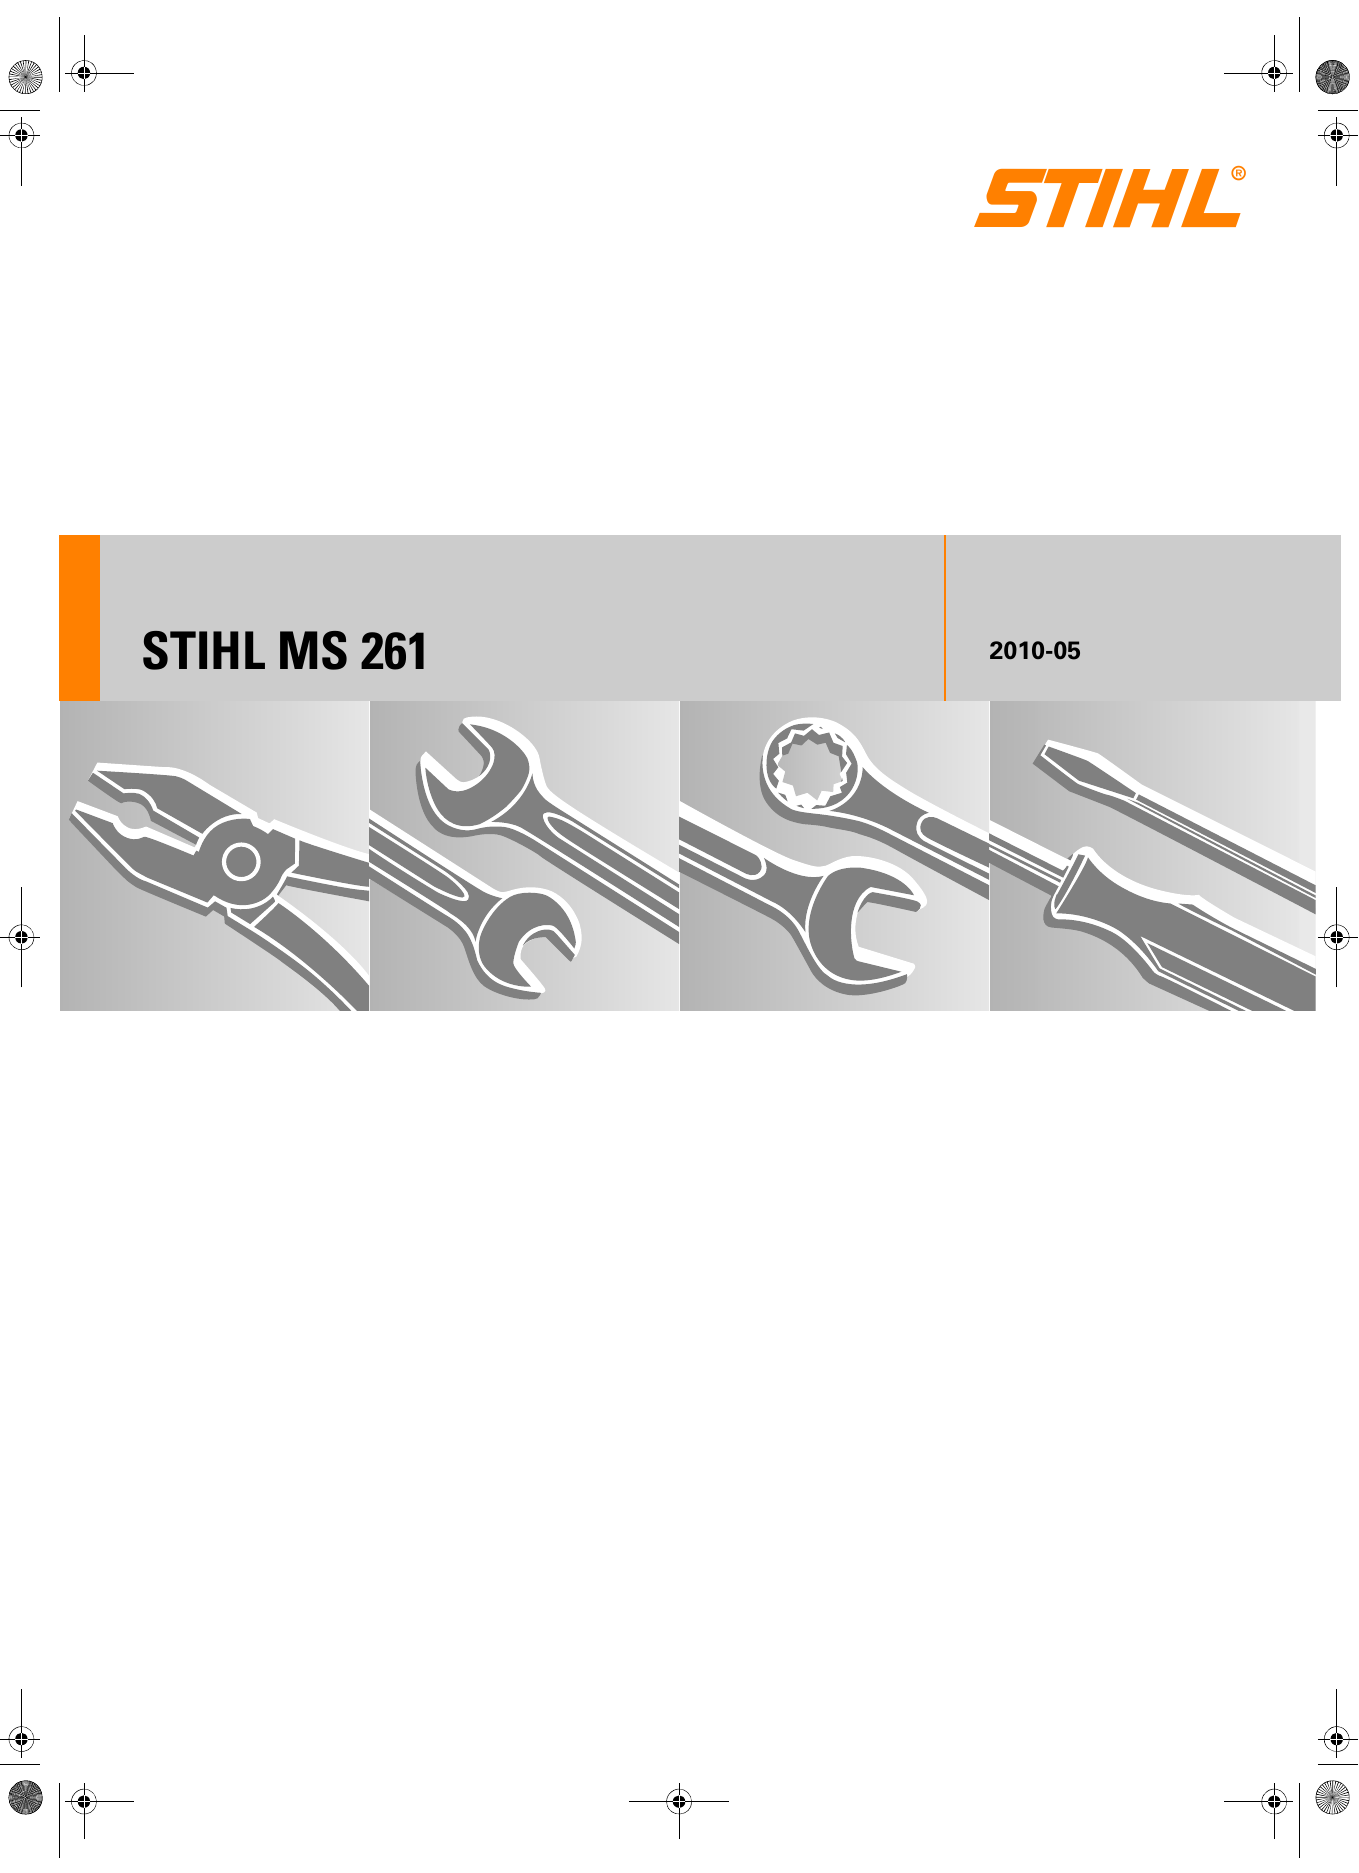 Stihl MS 261 Brushcutter manual Preview image 1